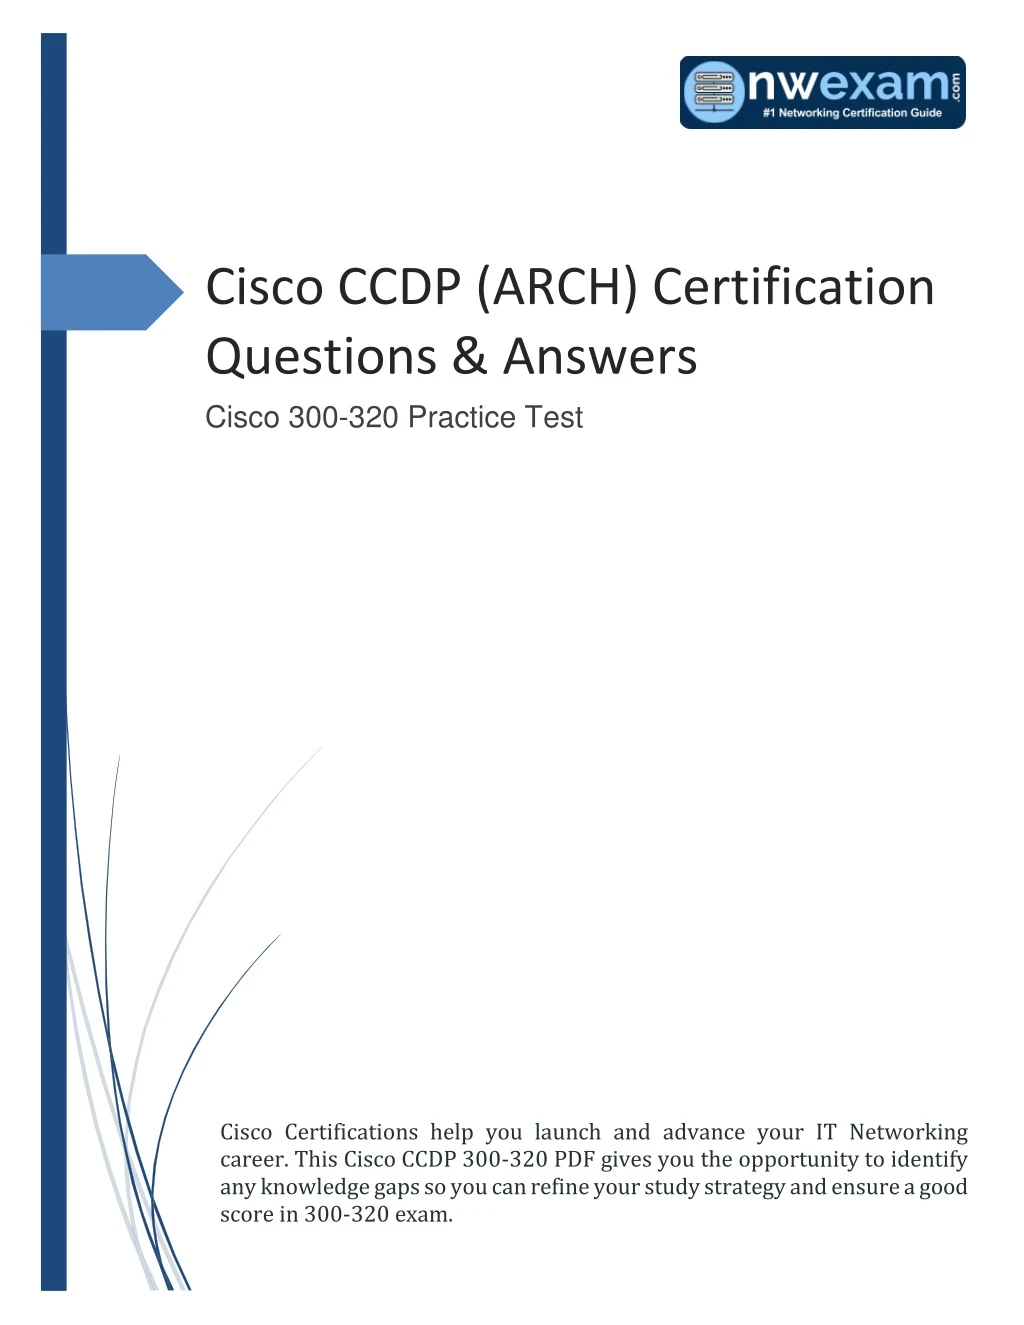 cisco ccdp arch certification questions answers